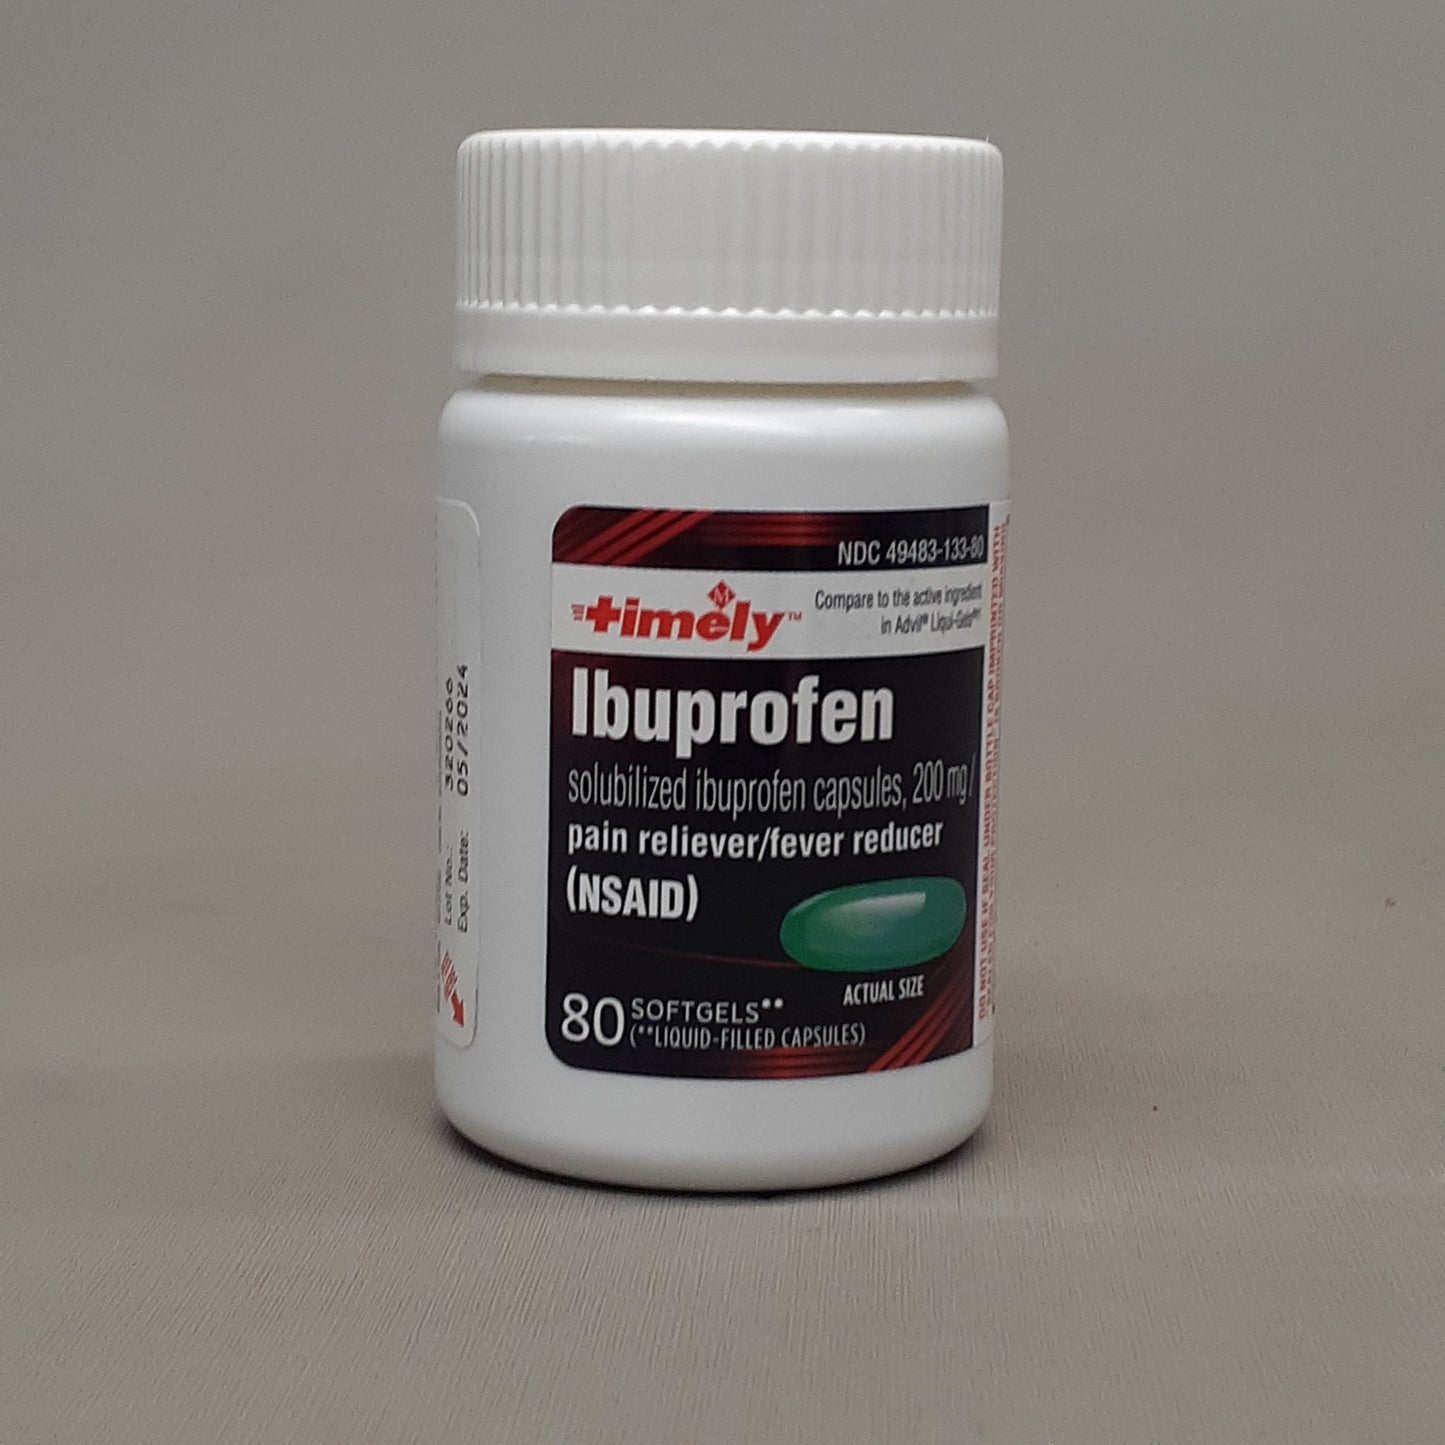 TIMELY Ibuprofen 3-PACK! 80 Softgels 200mg Pain Reliever/Fever Reducer BB 05/24 (New)